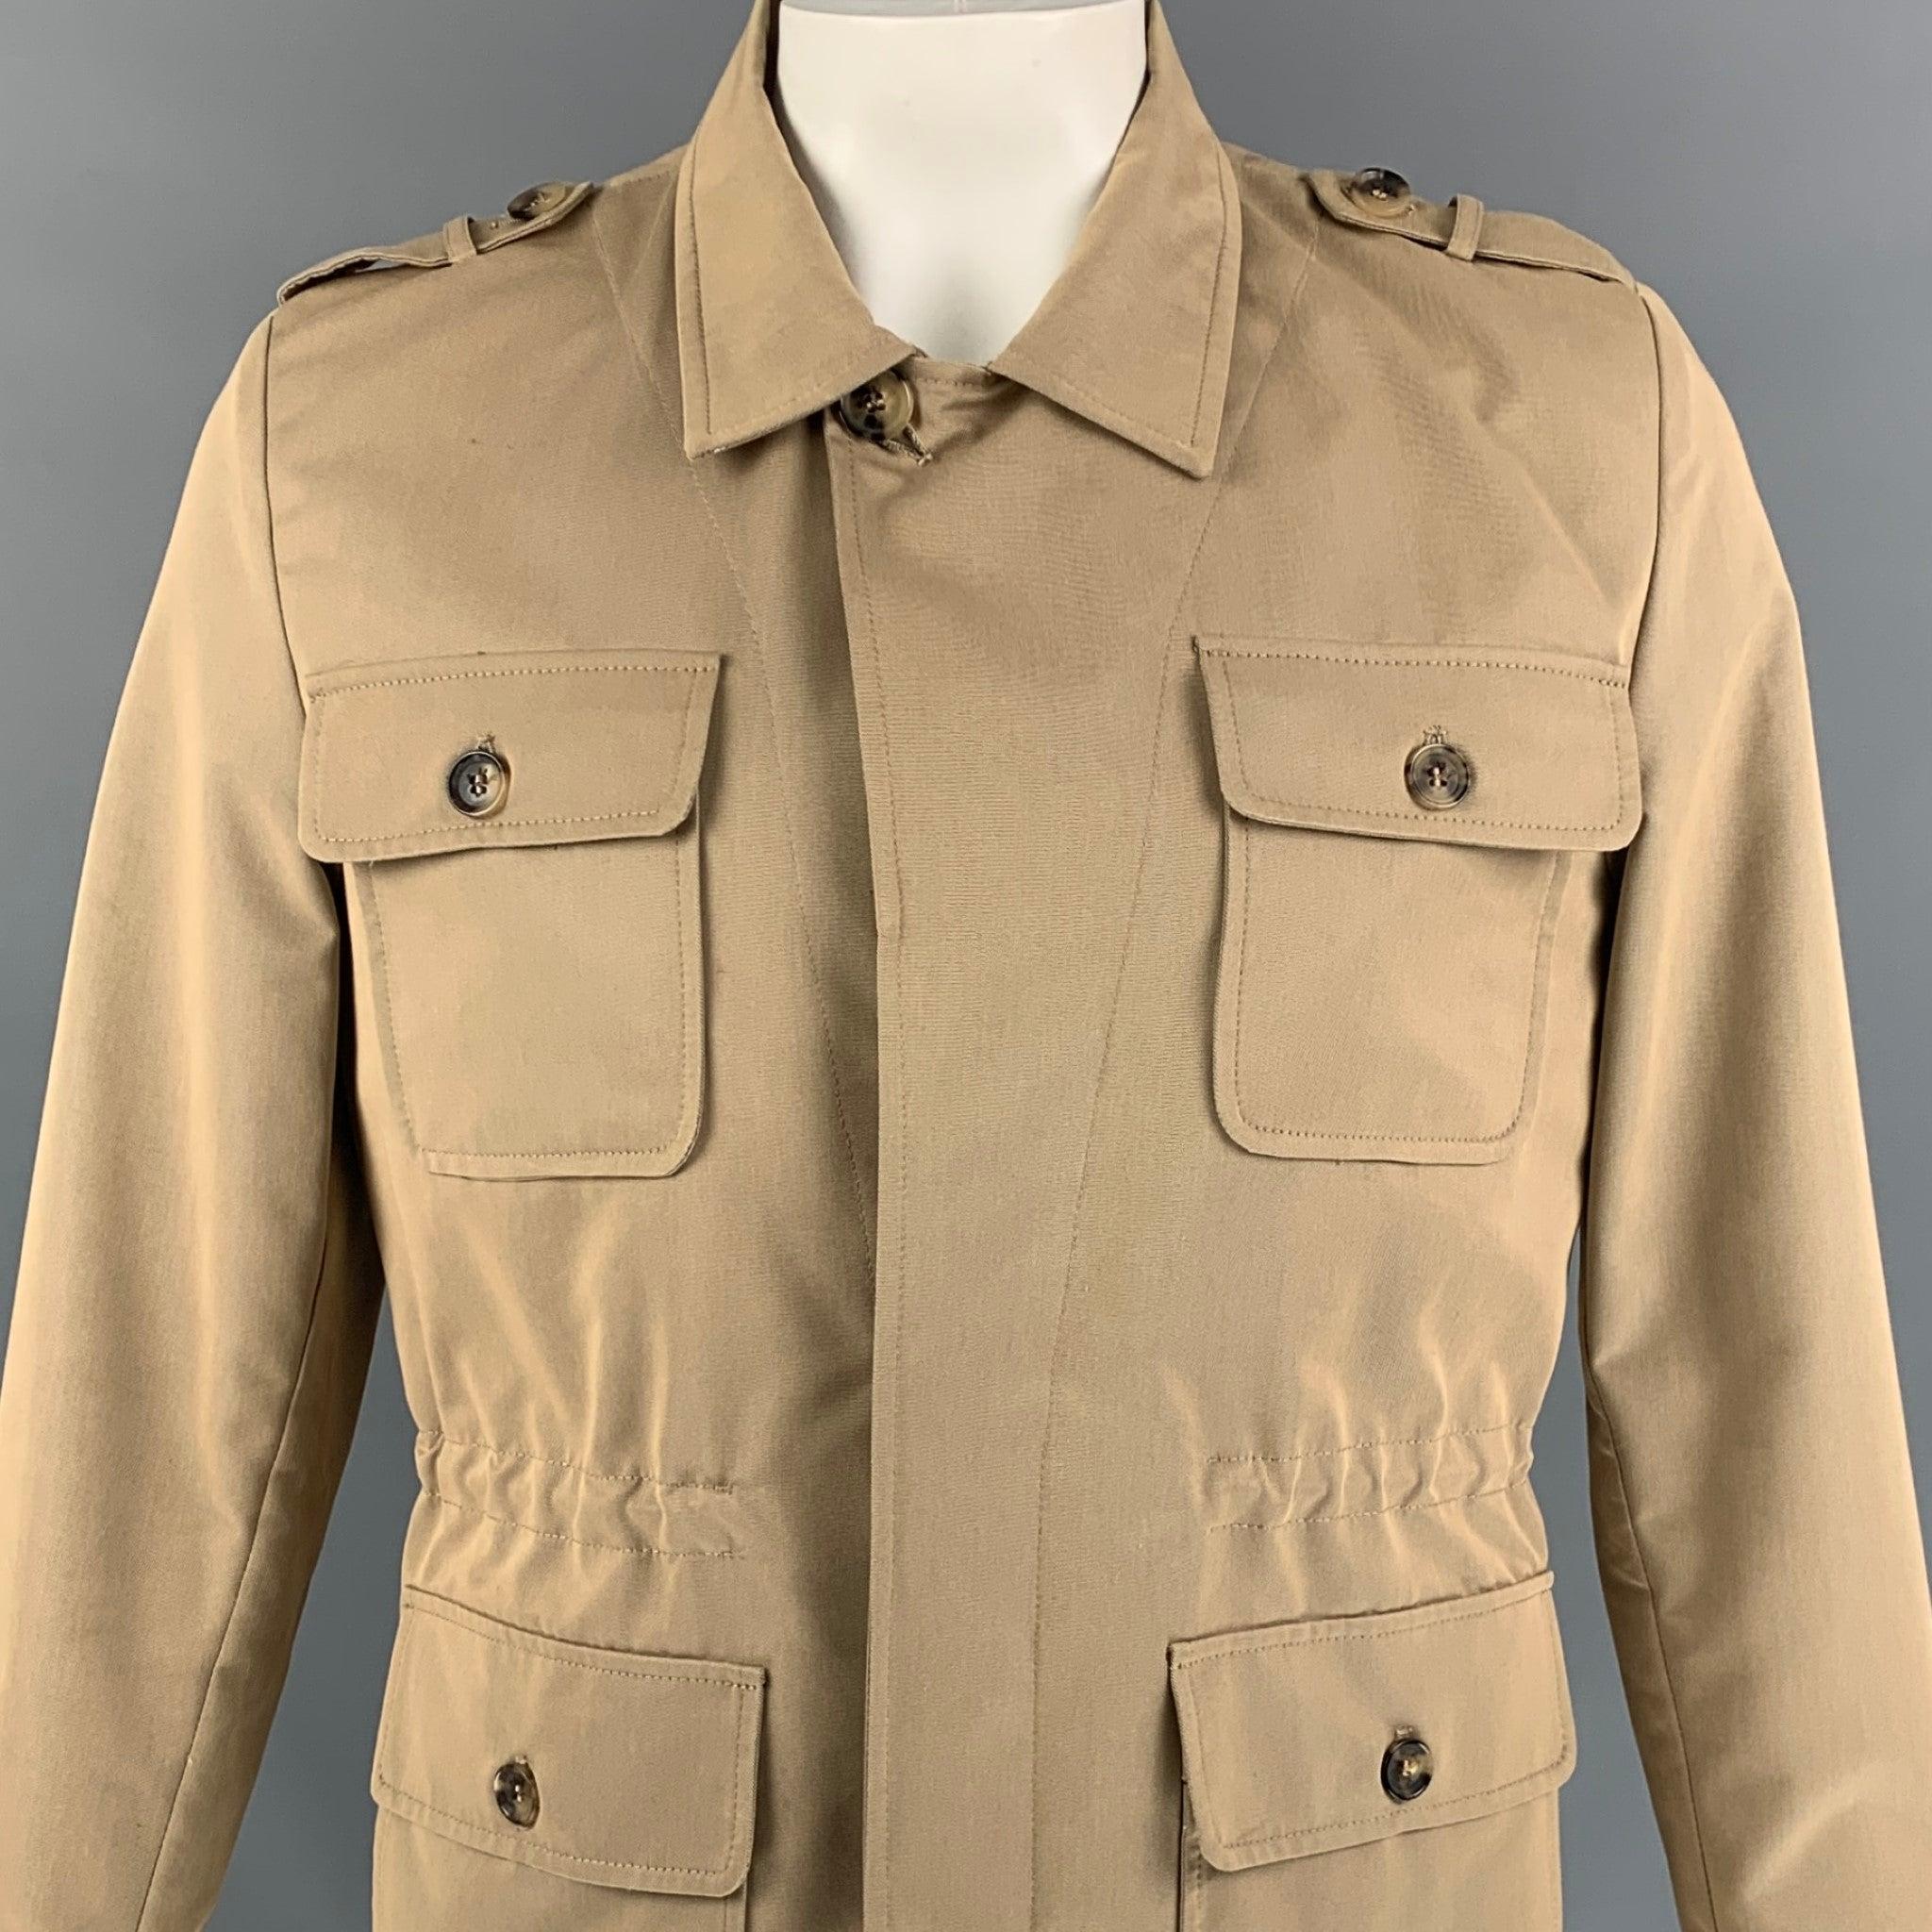 ISAIA jacket comes in a khaki cotton / polyester featuring an adjustable drawstring, epaulettes, spread collar, patch pockets, and a hidden placket closure. Made in Italy.
Excellent
Pre-Owned Condition. 

Marked:   50 R  

Measurements: 
 
Shoulder: